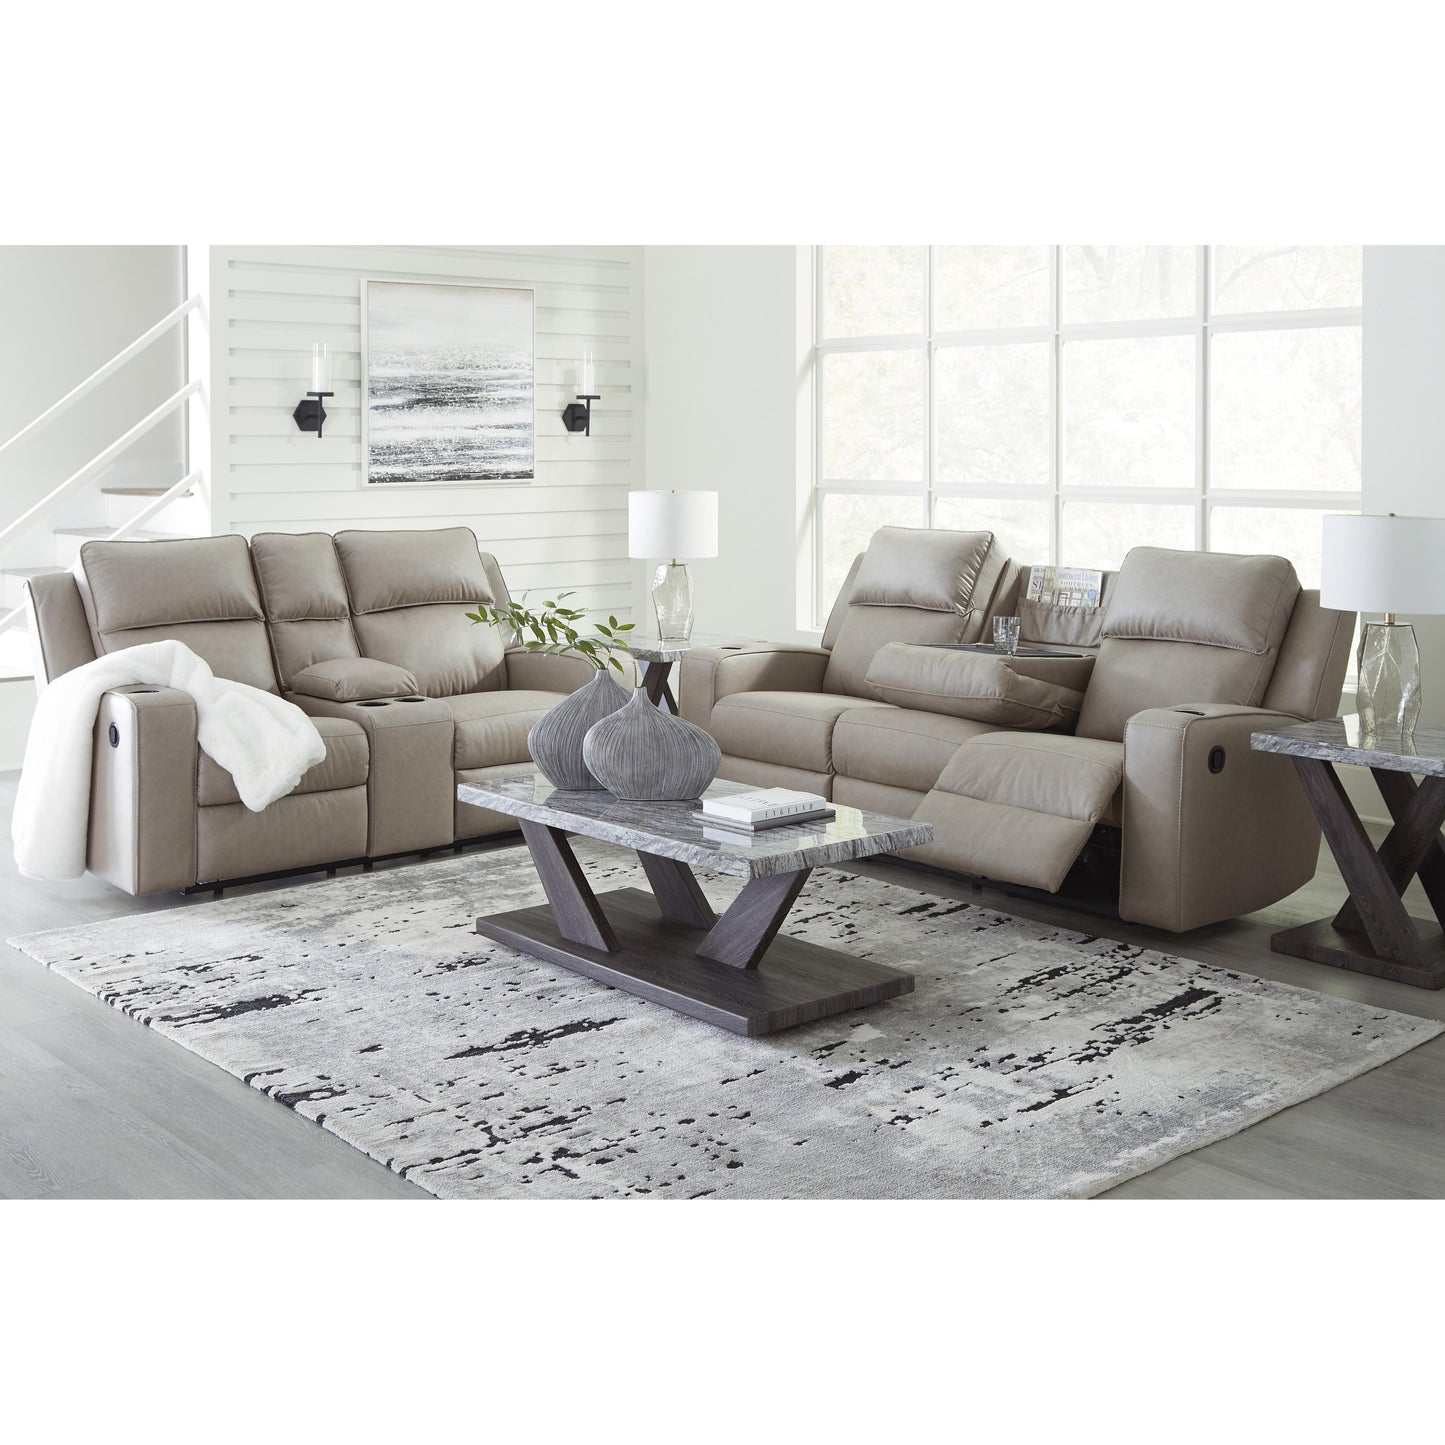 Signature Design by Ashley Lavenhorne Reclining Leather Look Loveseat 6330794 IMAGE 14